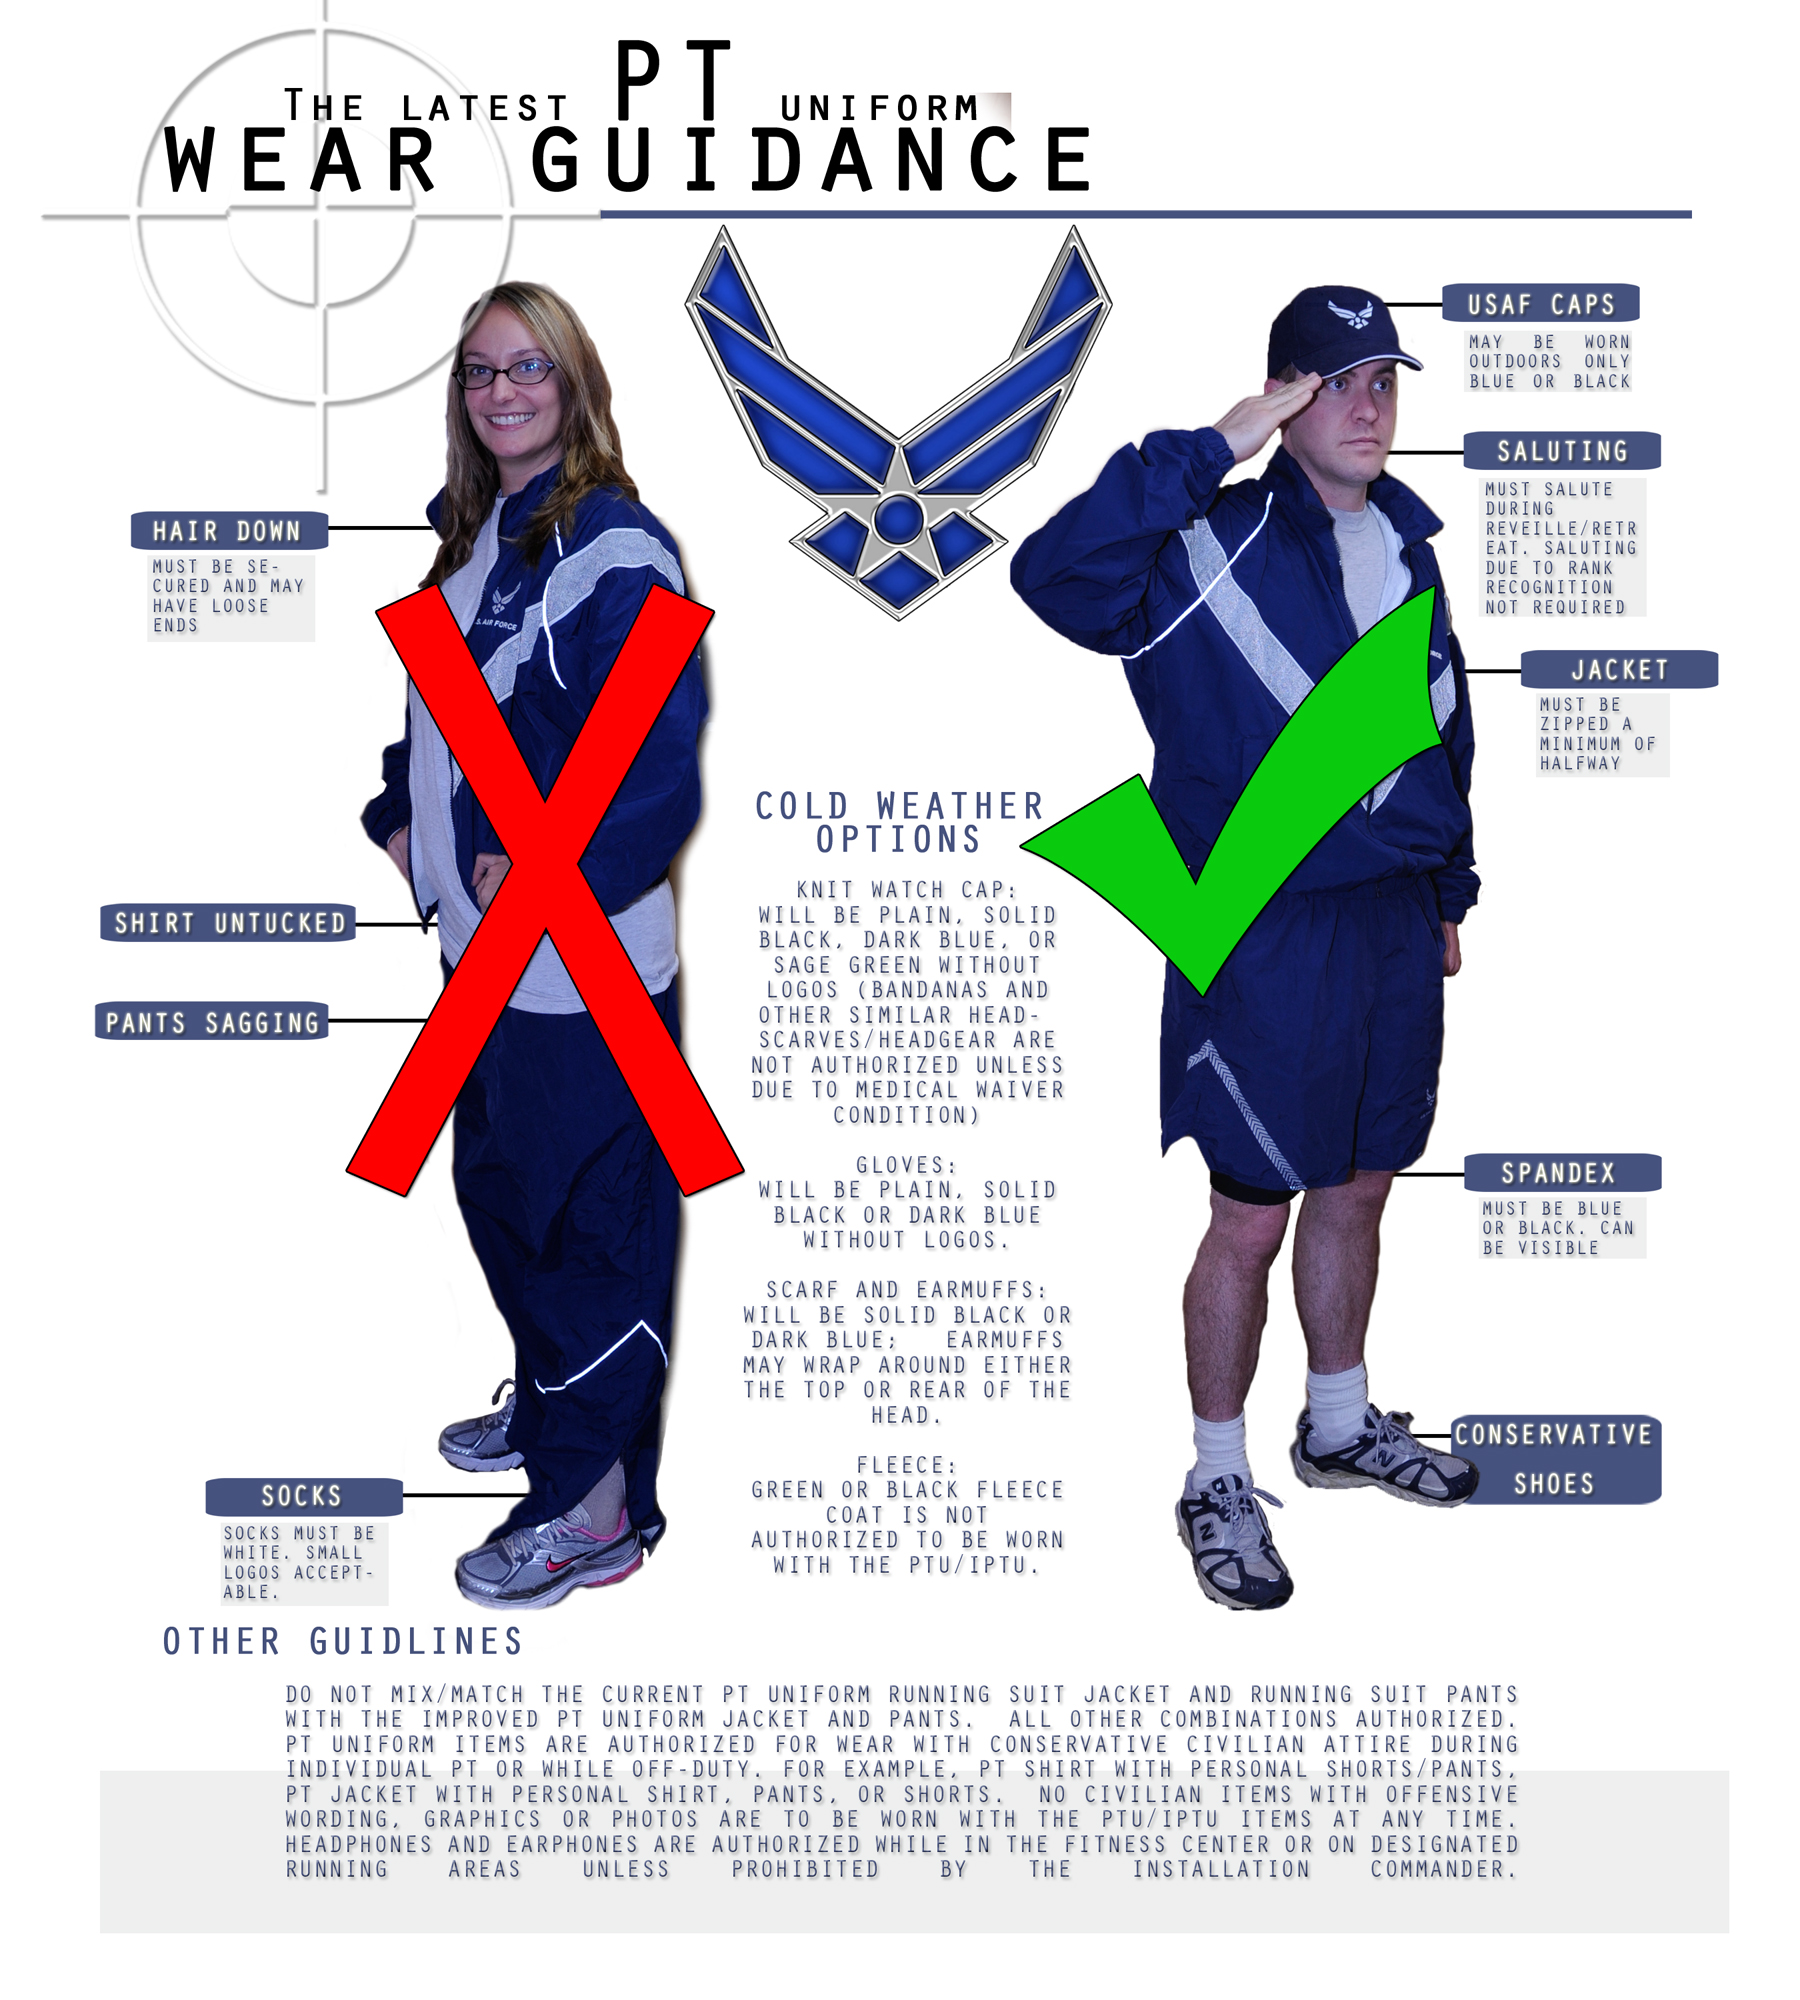 air force clothes and accessories